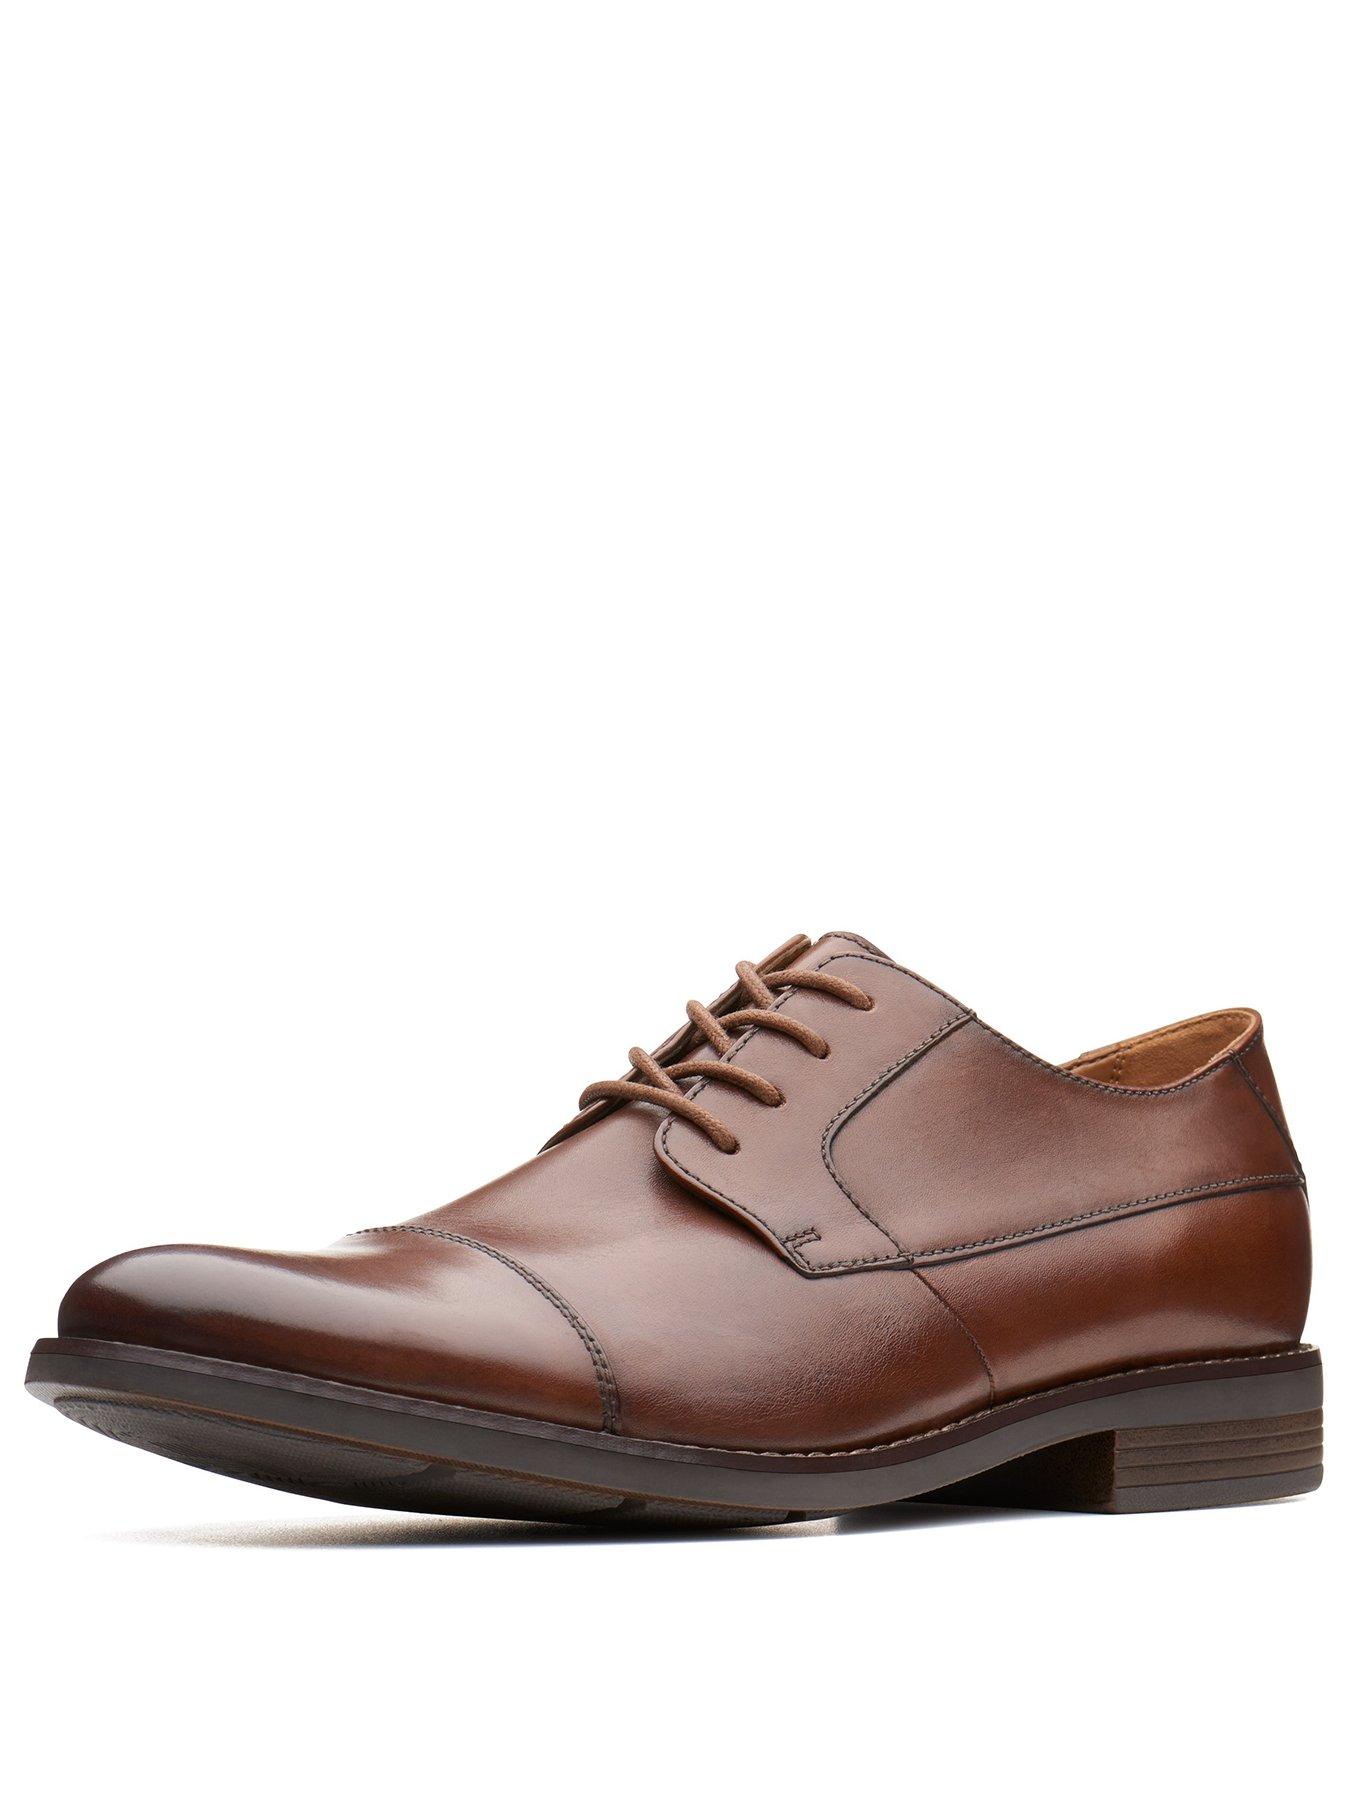 discount code for clarks shoes 219